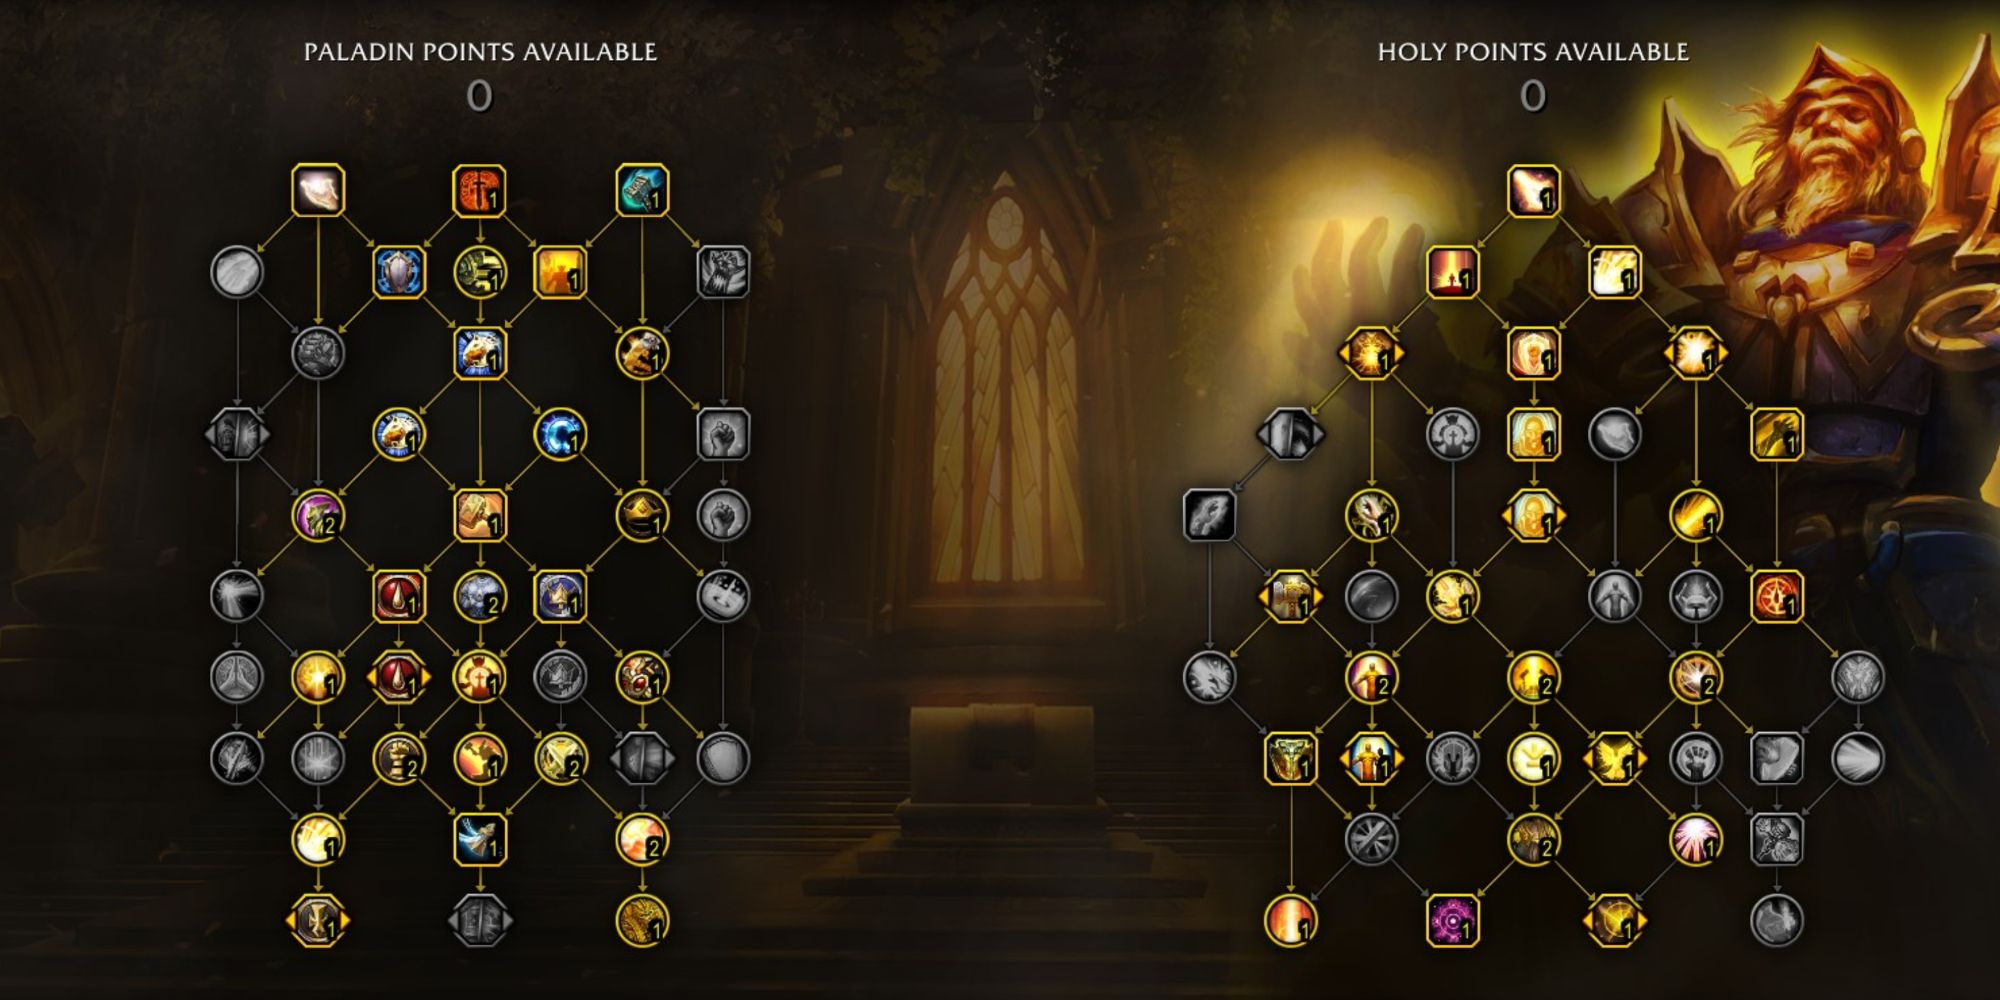 Holy Paladin Avenging Crusader Build Talent Tree In Game In World Of Warcraft